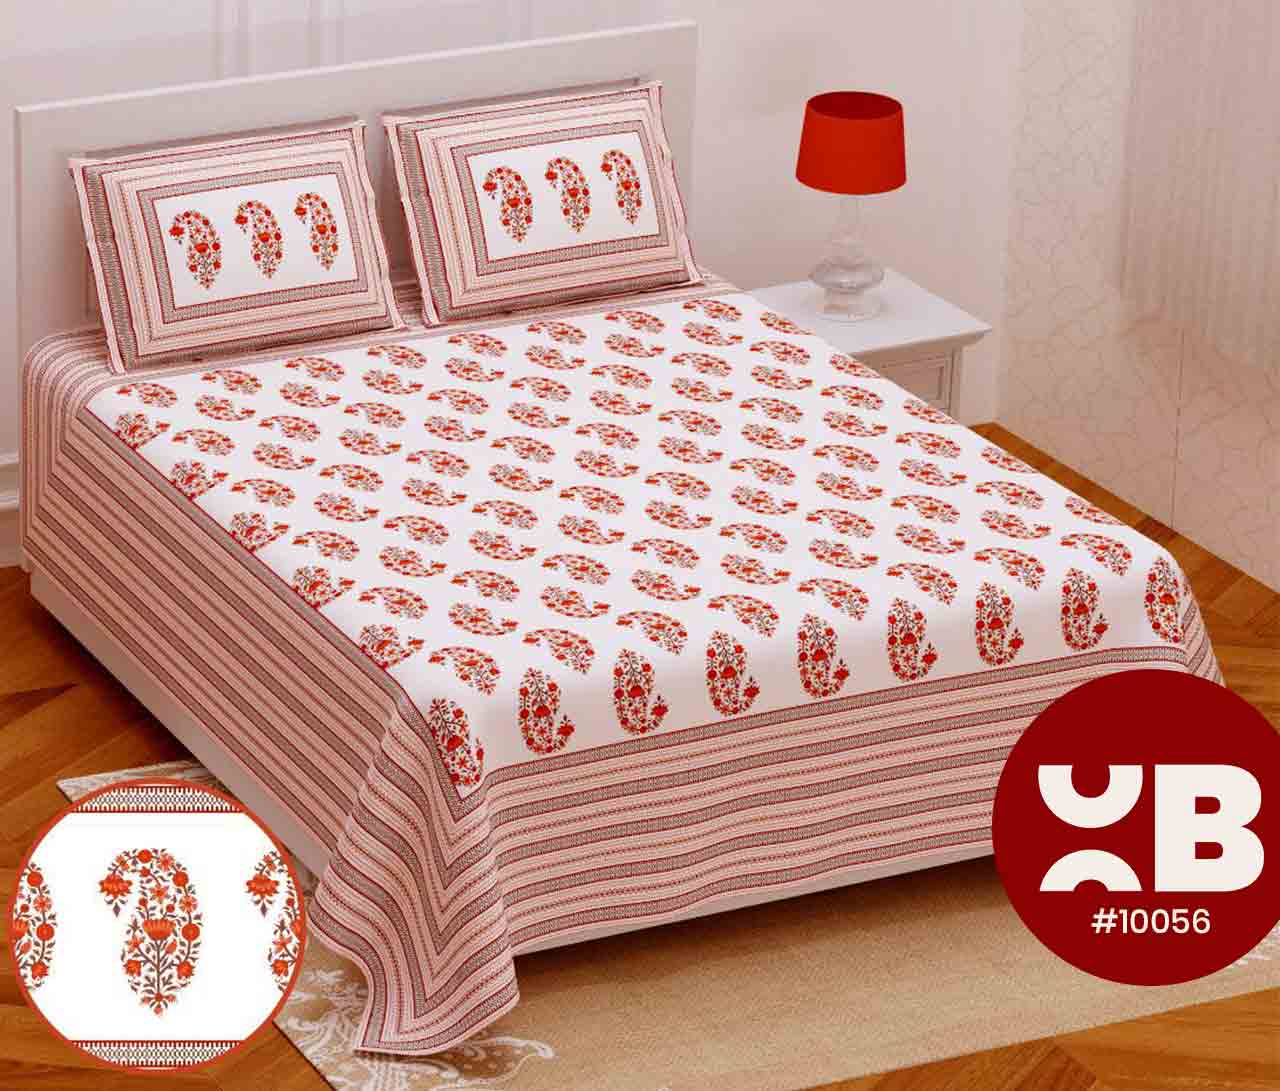 Lovely Jaipuri Printed Queen Size Double Bedsheet With Two Pillow Covers (100x100)